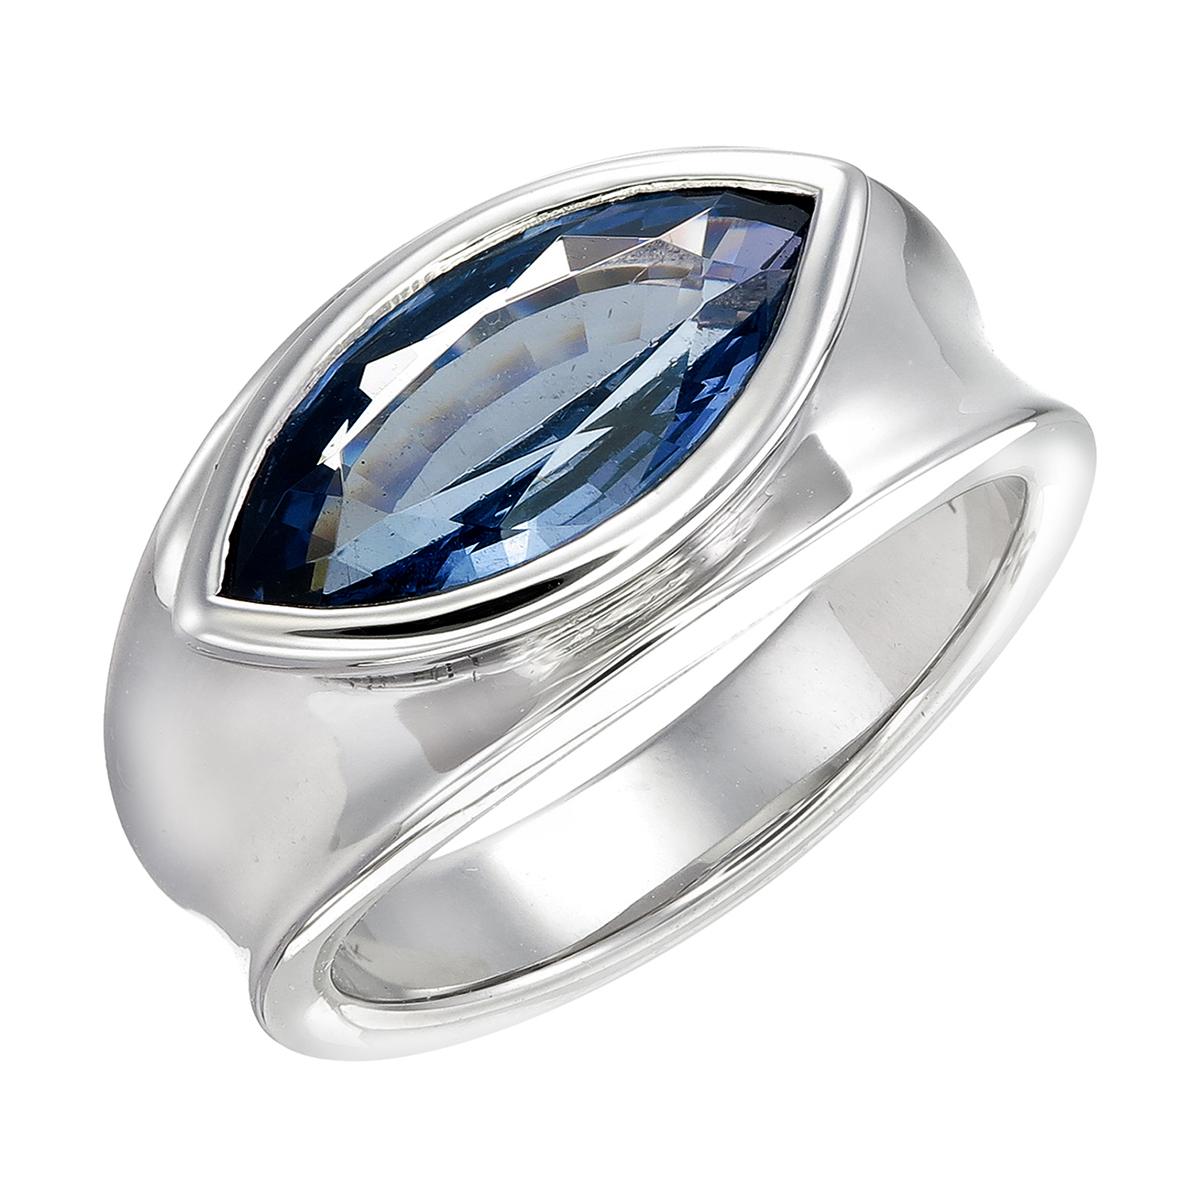 Orloff of Denmark's: Eye of the Sea Sculpture ring

A beautiful one-of-a-kind blue Ceylon spinel sculpture ring forged in 950 Platinum.

;We here at Orloff of Denmark are more than happy to present this fine piece to the public.

Ring Size: 6